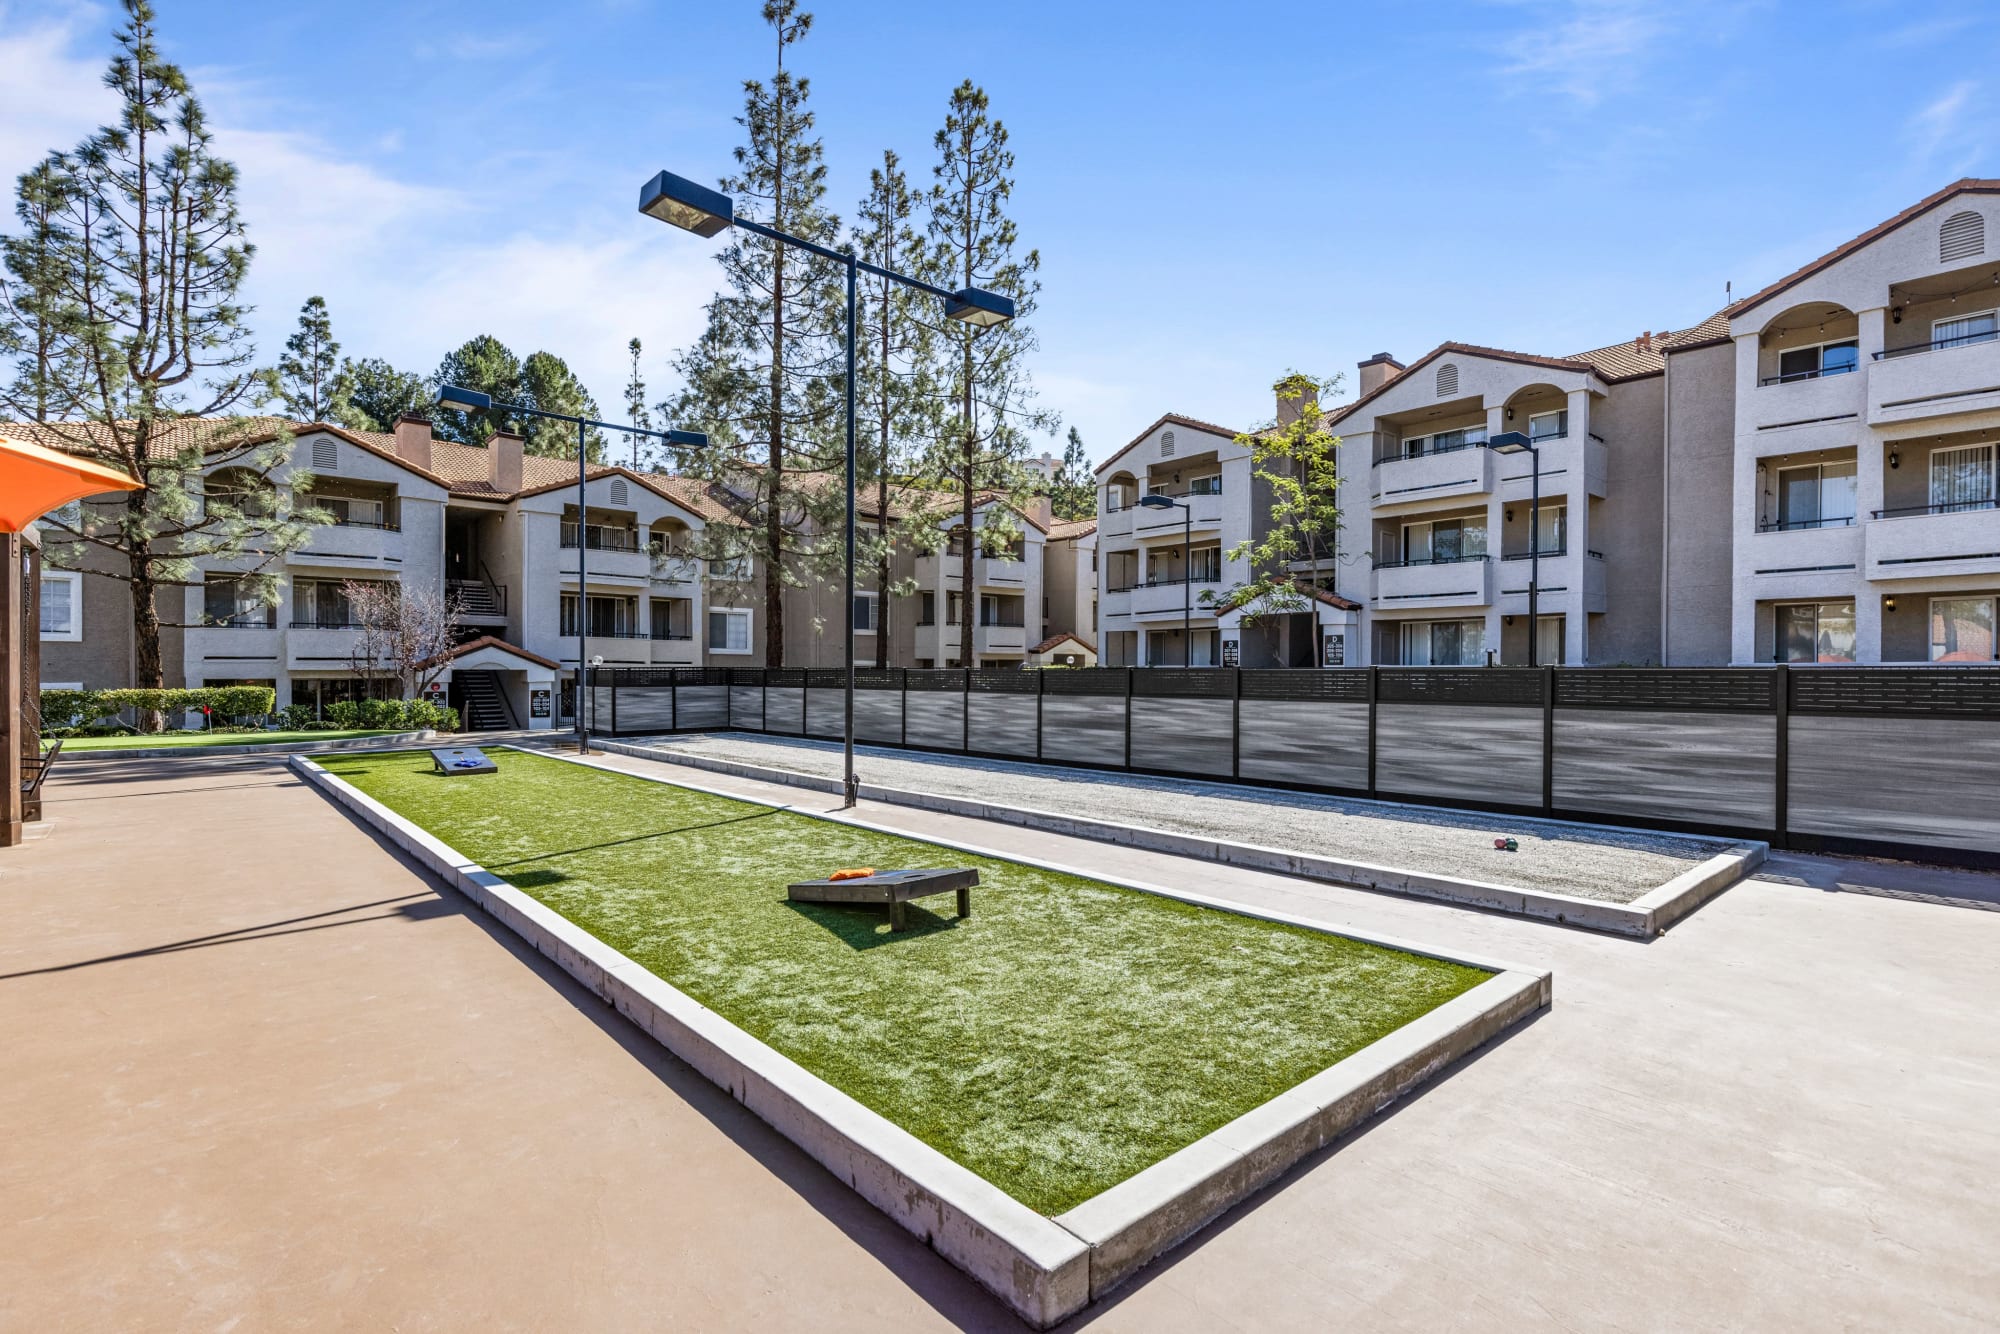 Courtyard with corn hole at Sierra Del Oro Apartments in Corona, California